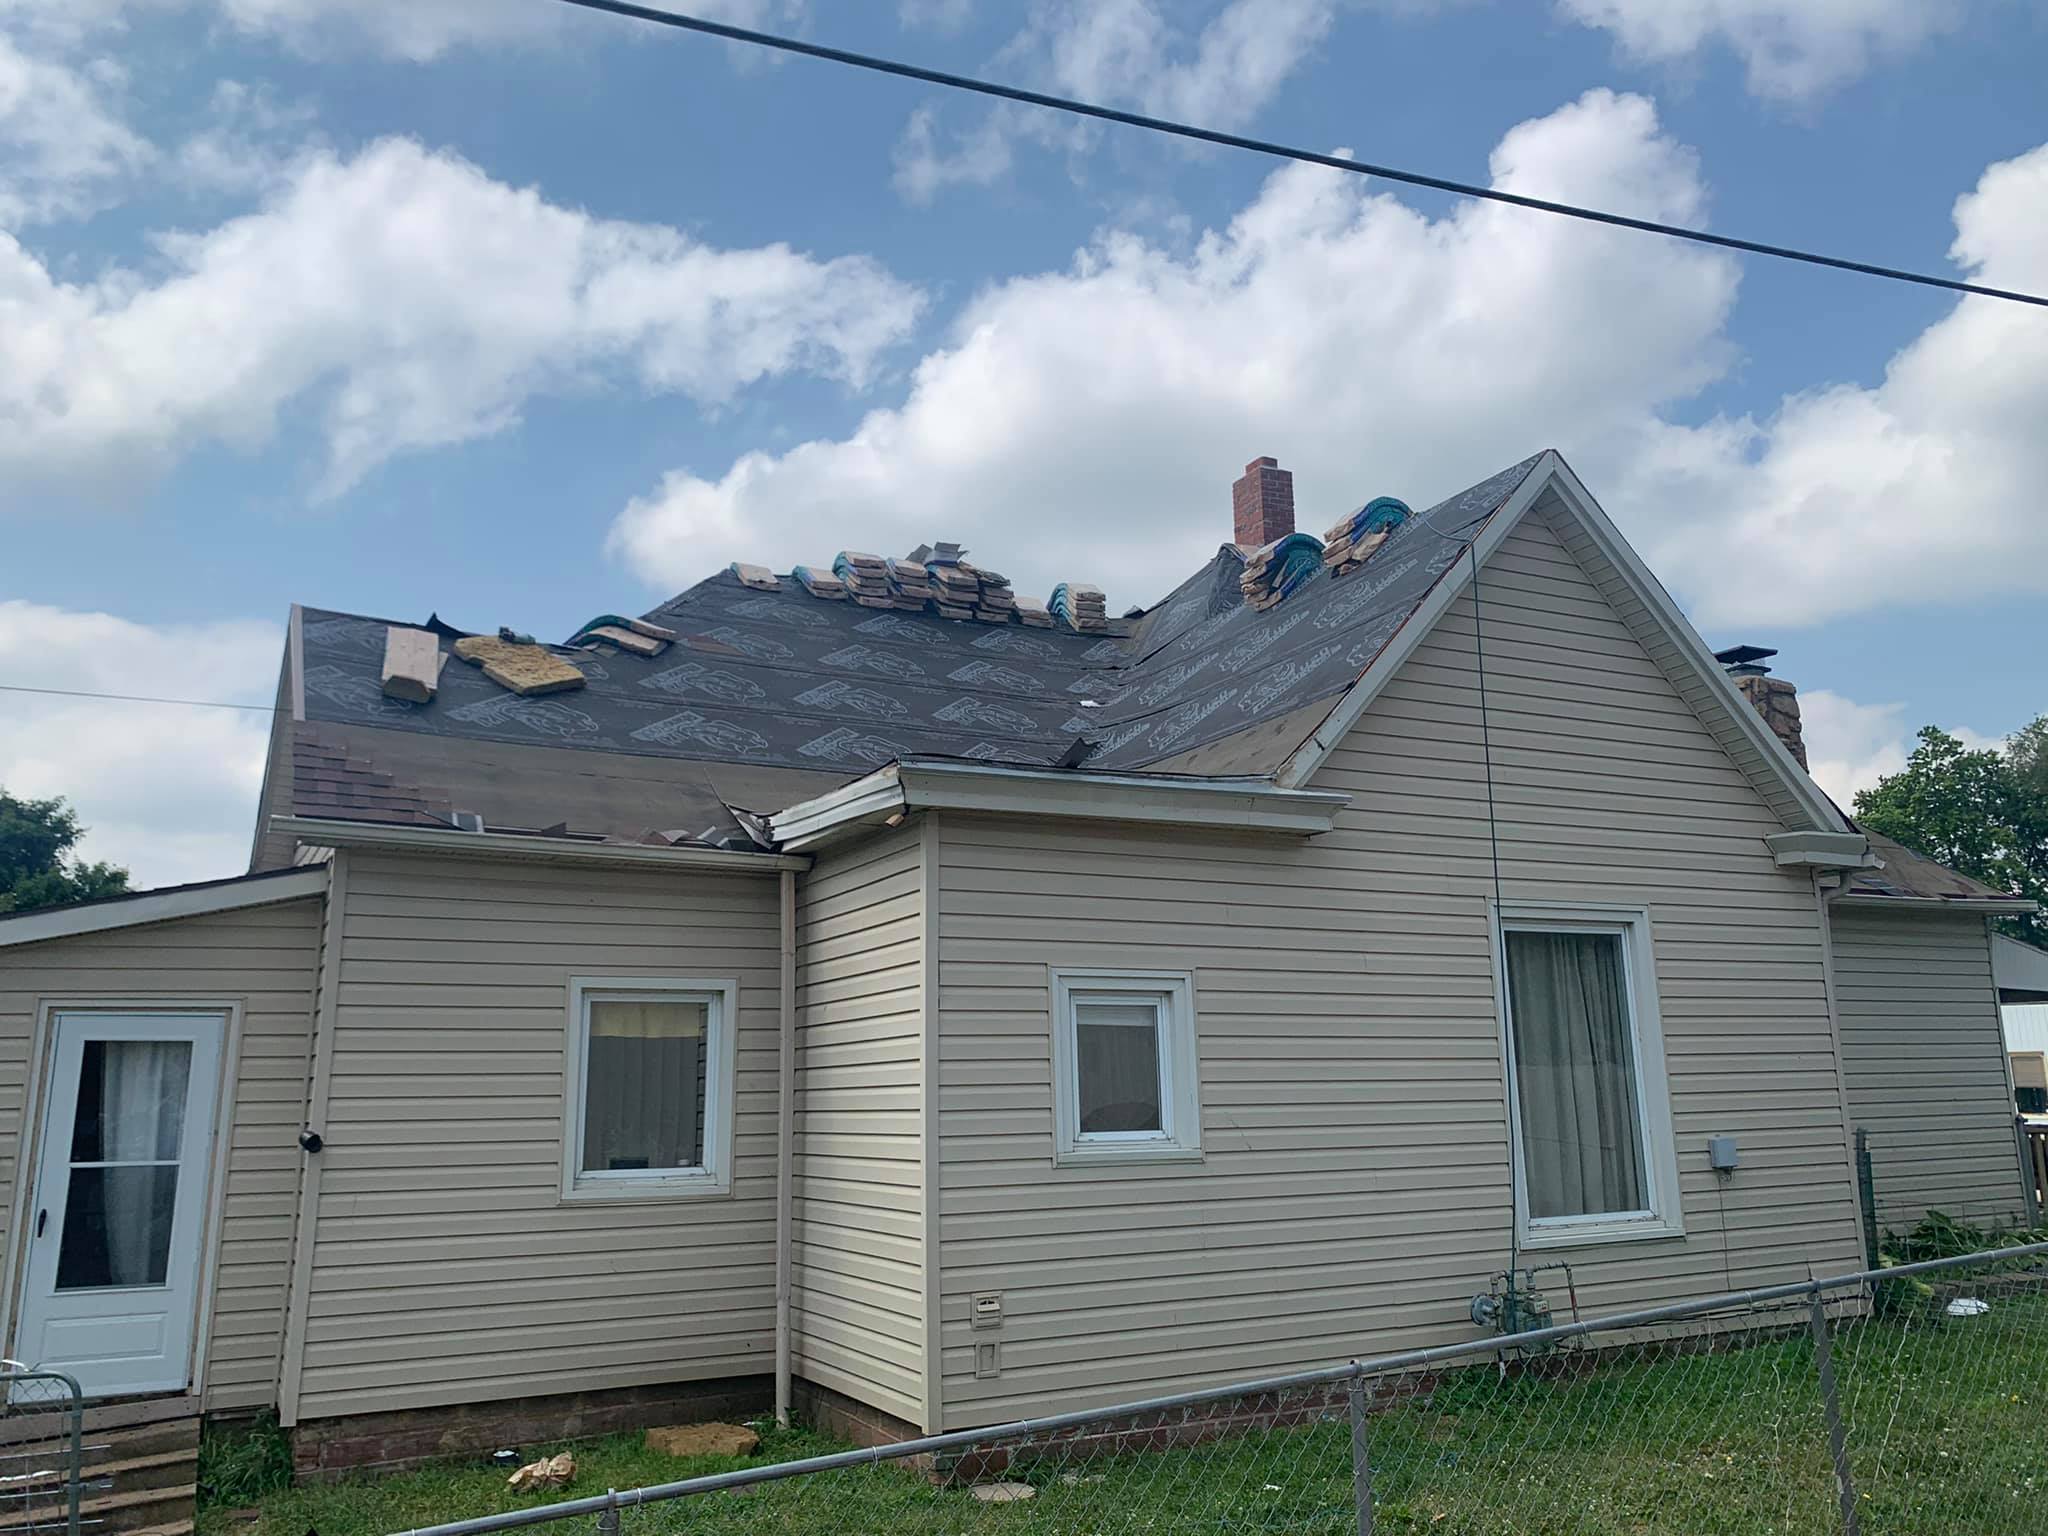 Roof Repair Liberty Missouri - Top Tips For Finding The Best Company